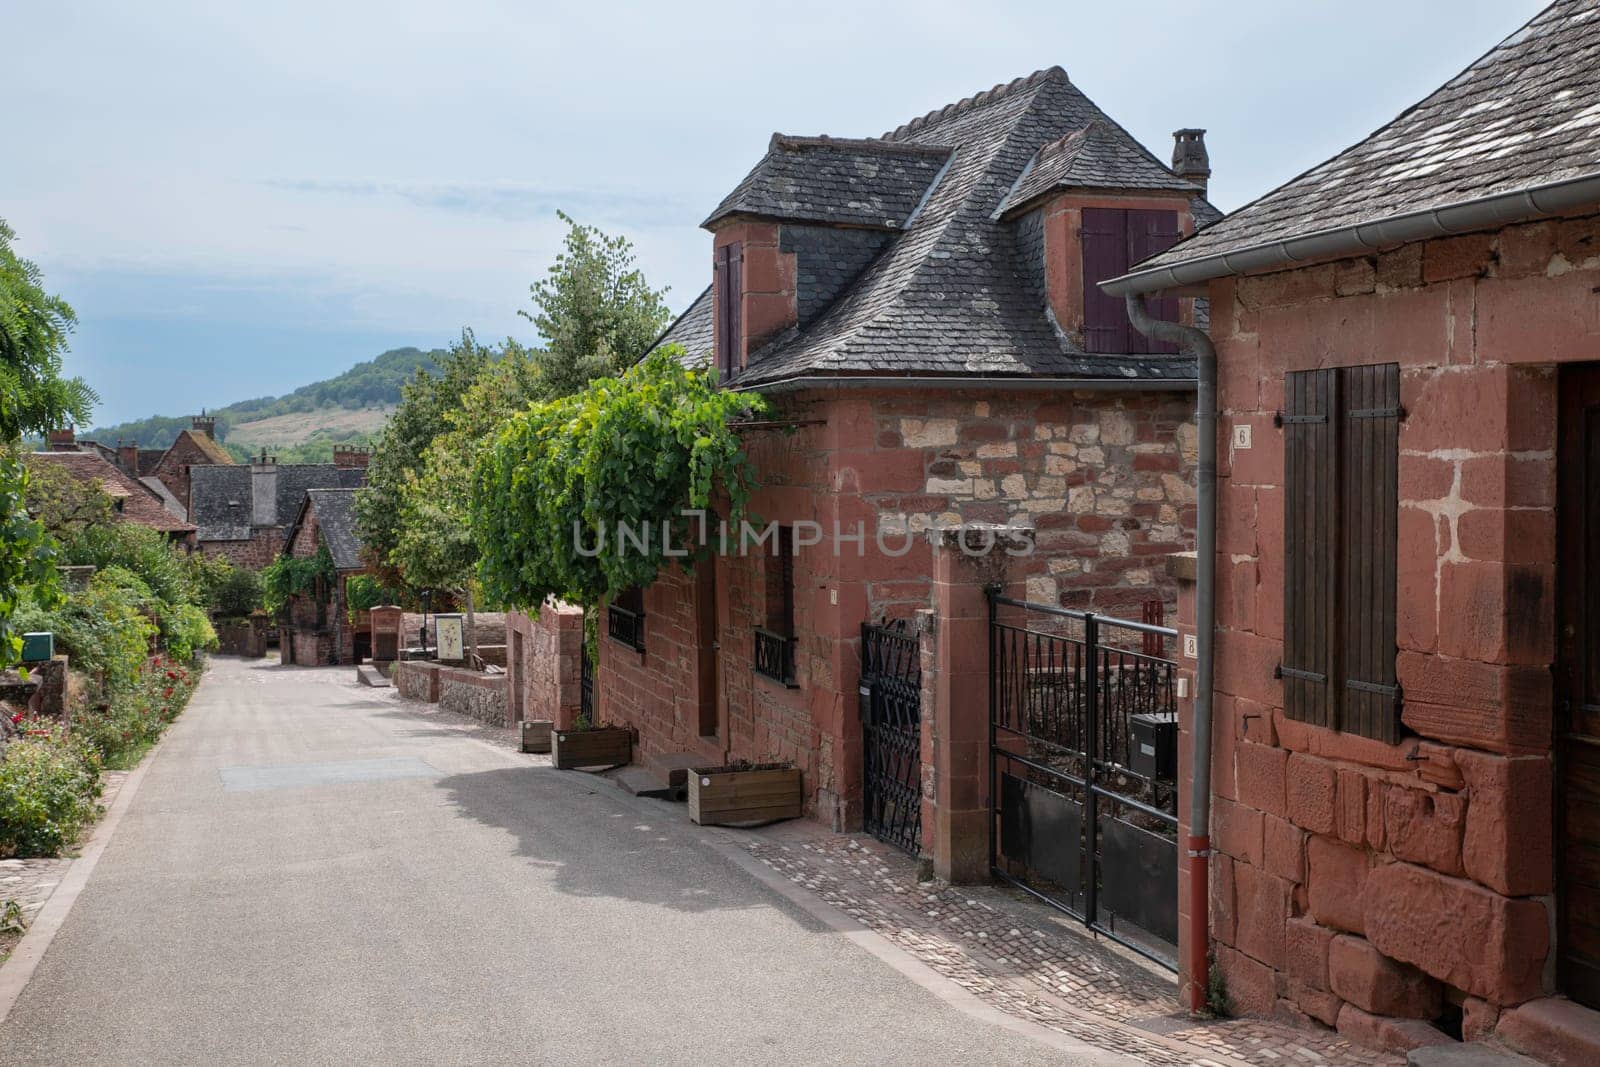 The red village Collonges la rouge in france by compuinfoto